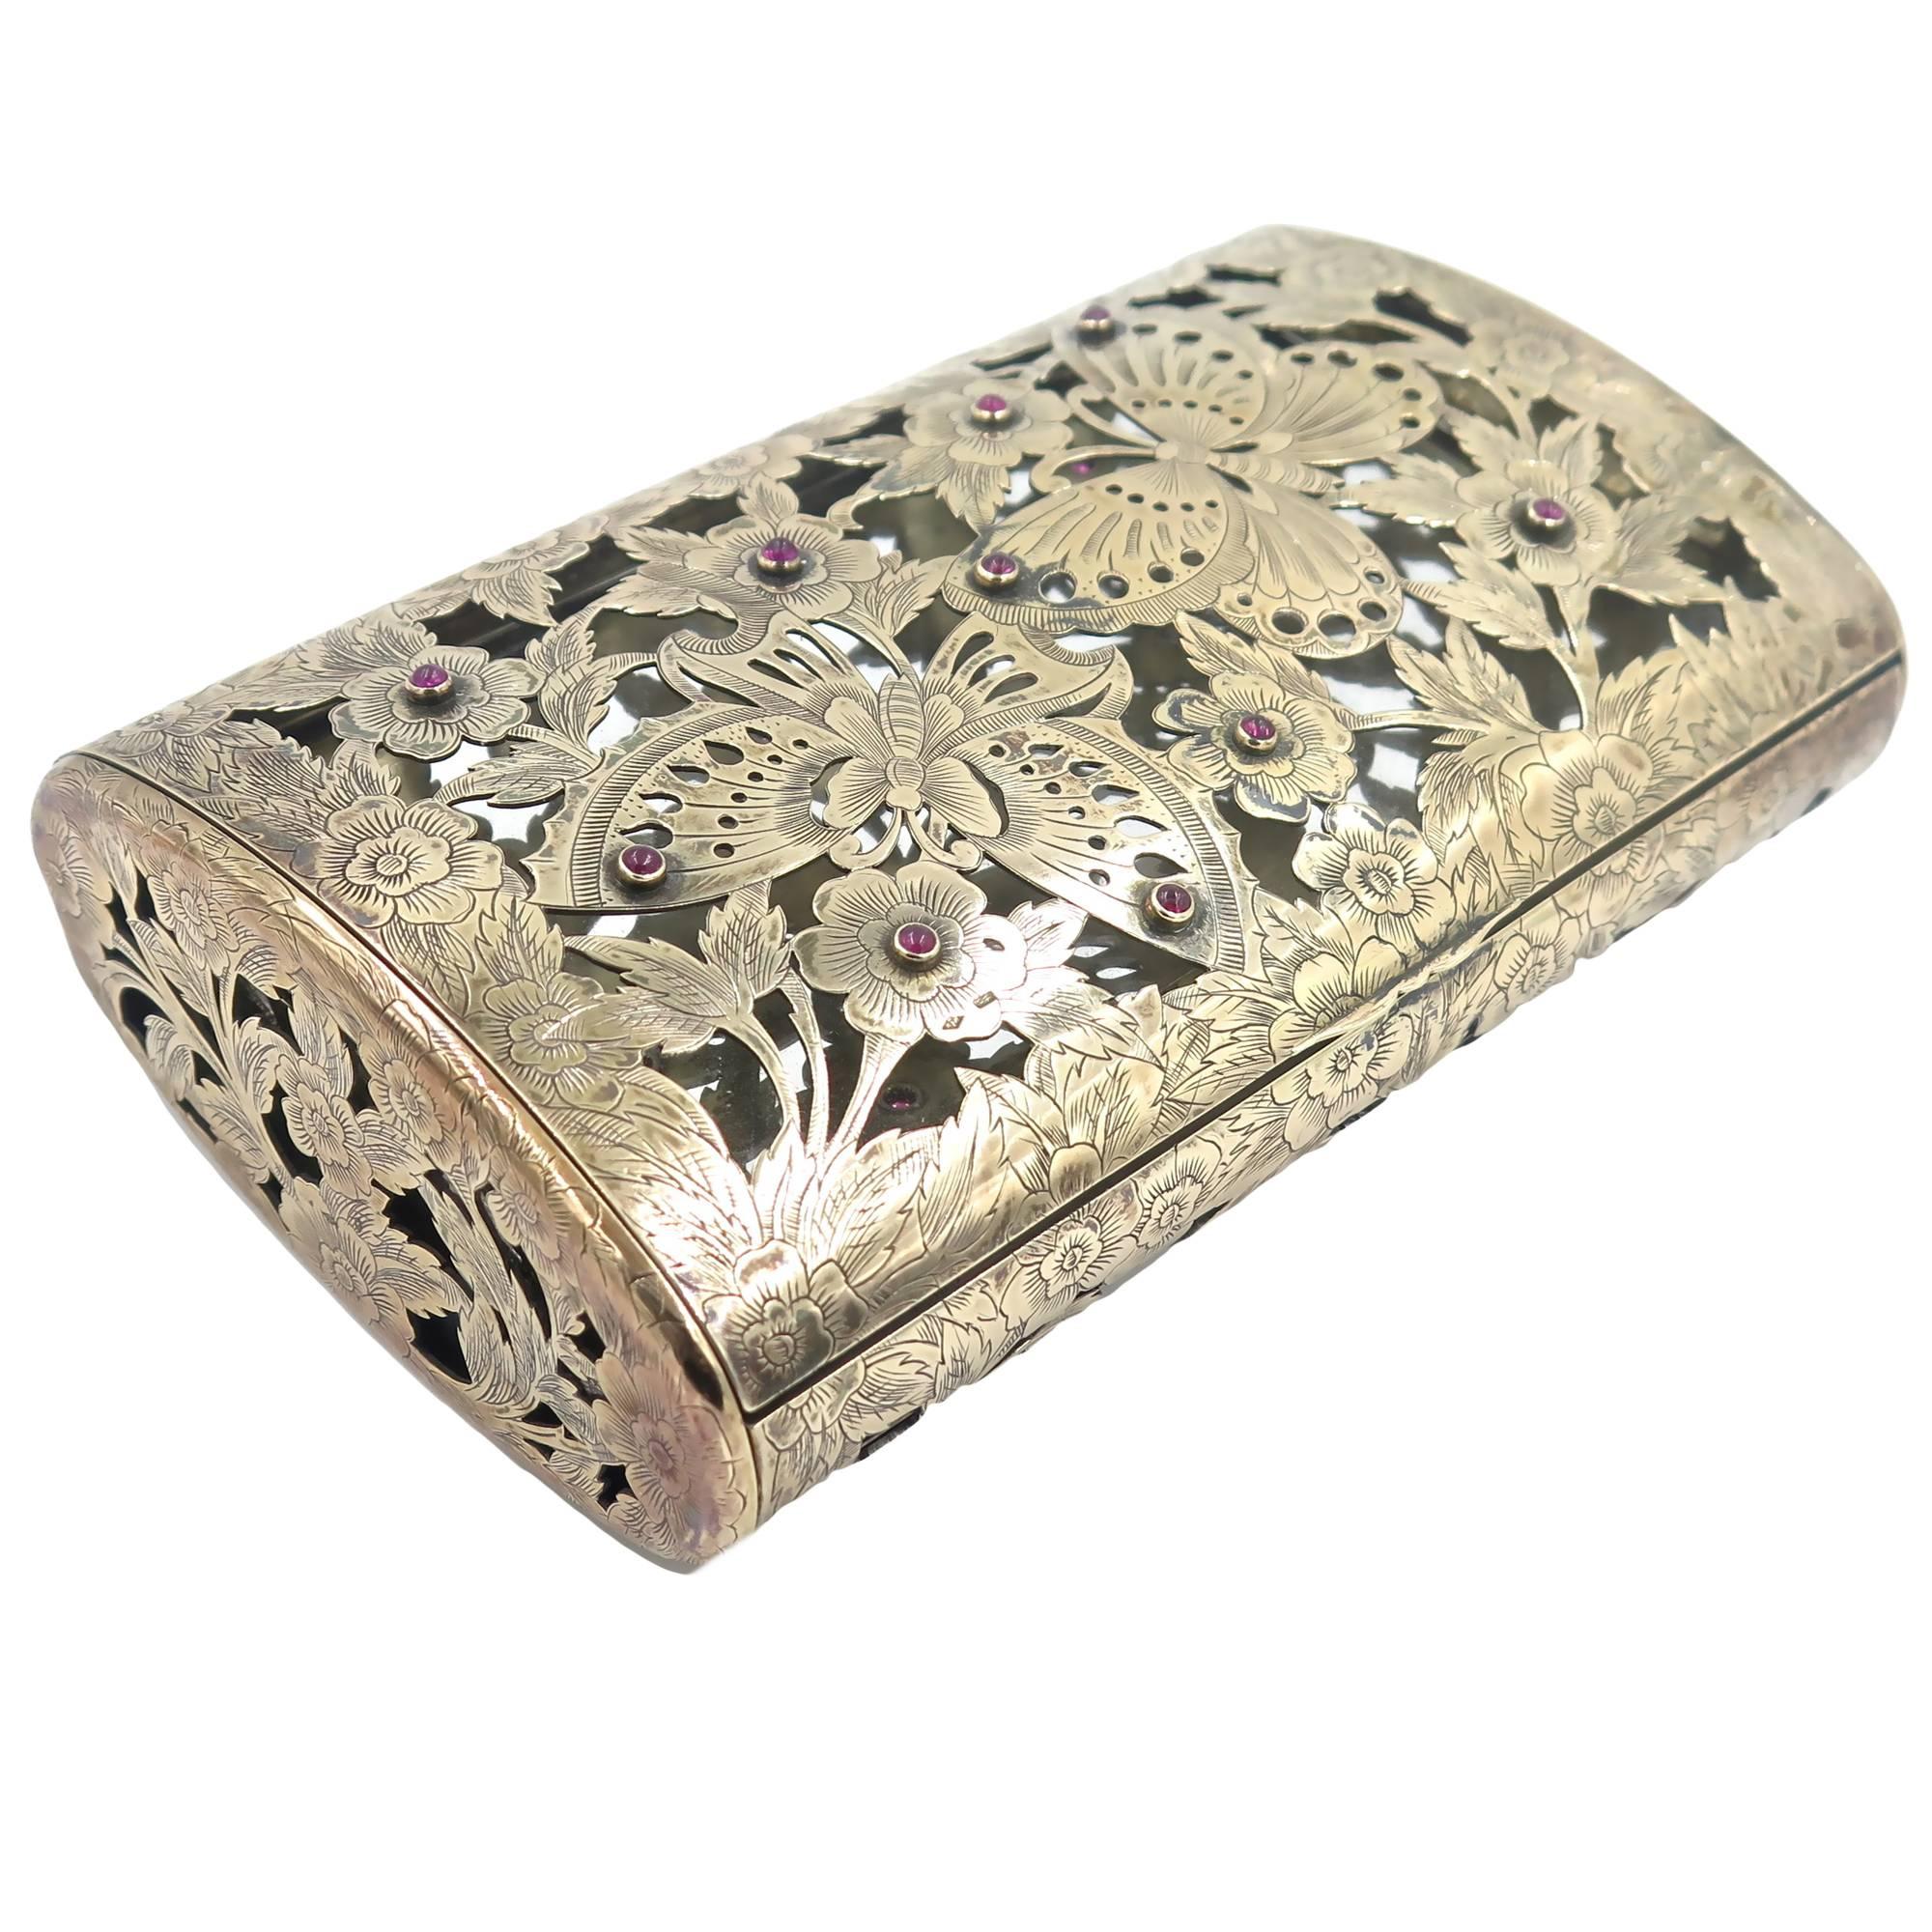 BOUCHERON Rose Gold Topped Silver and Ruby Vanity Case.